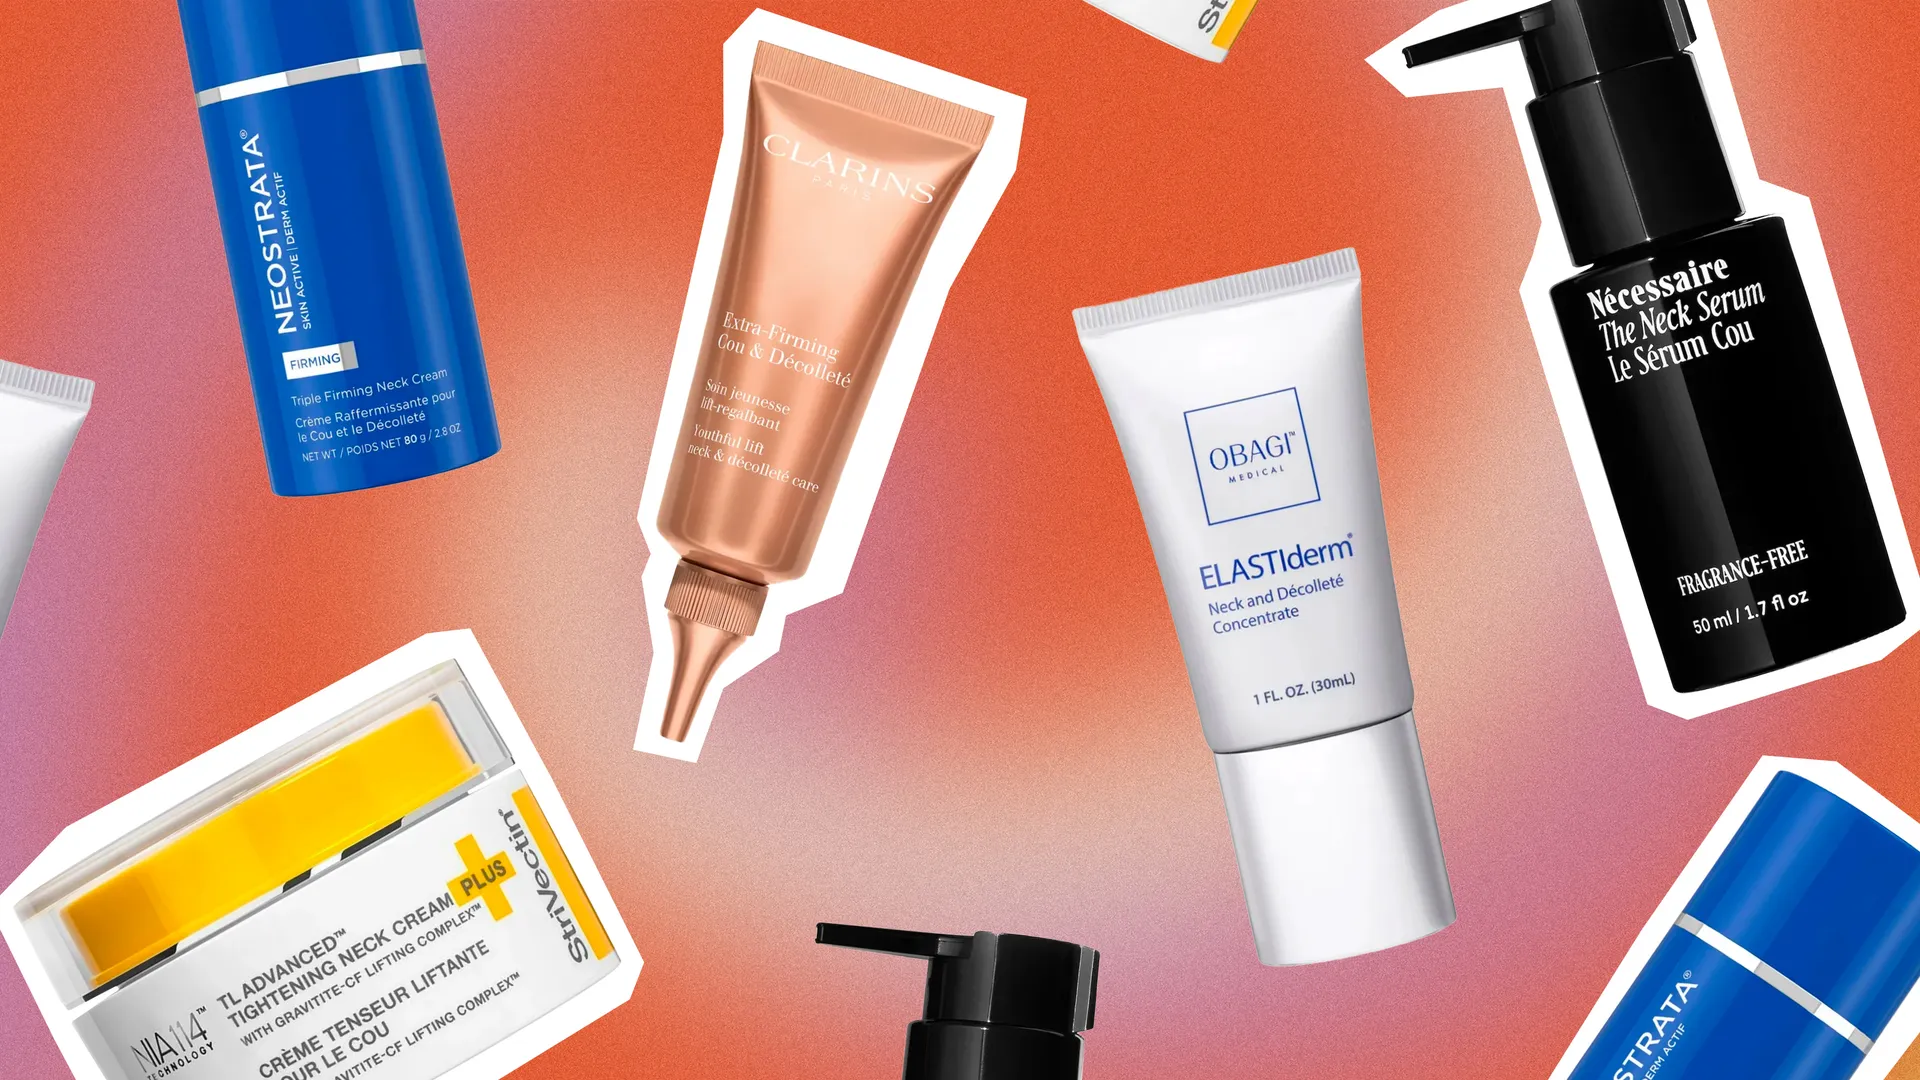 19 Top Neck-Firming Creams, Tried and Recommended by Dermatologists